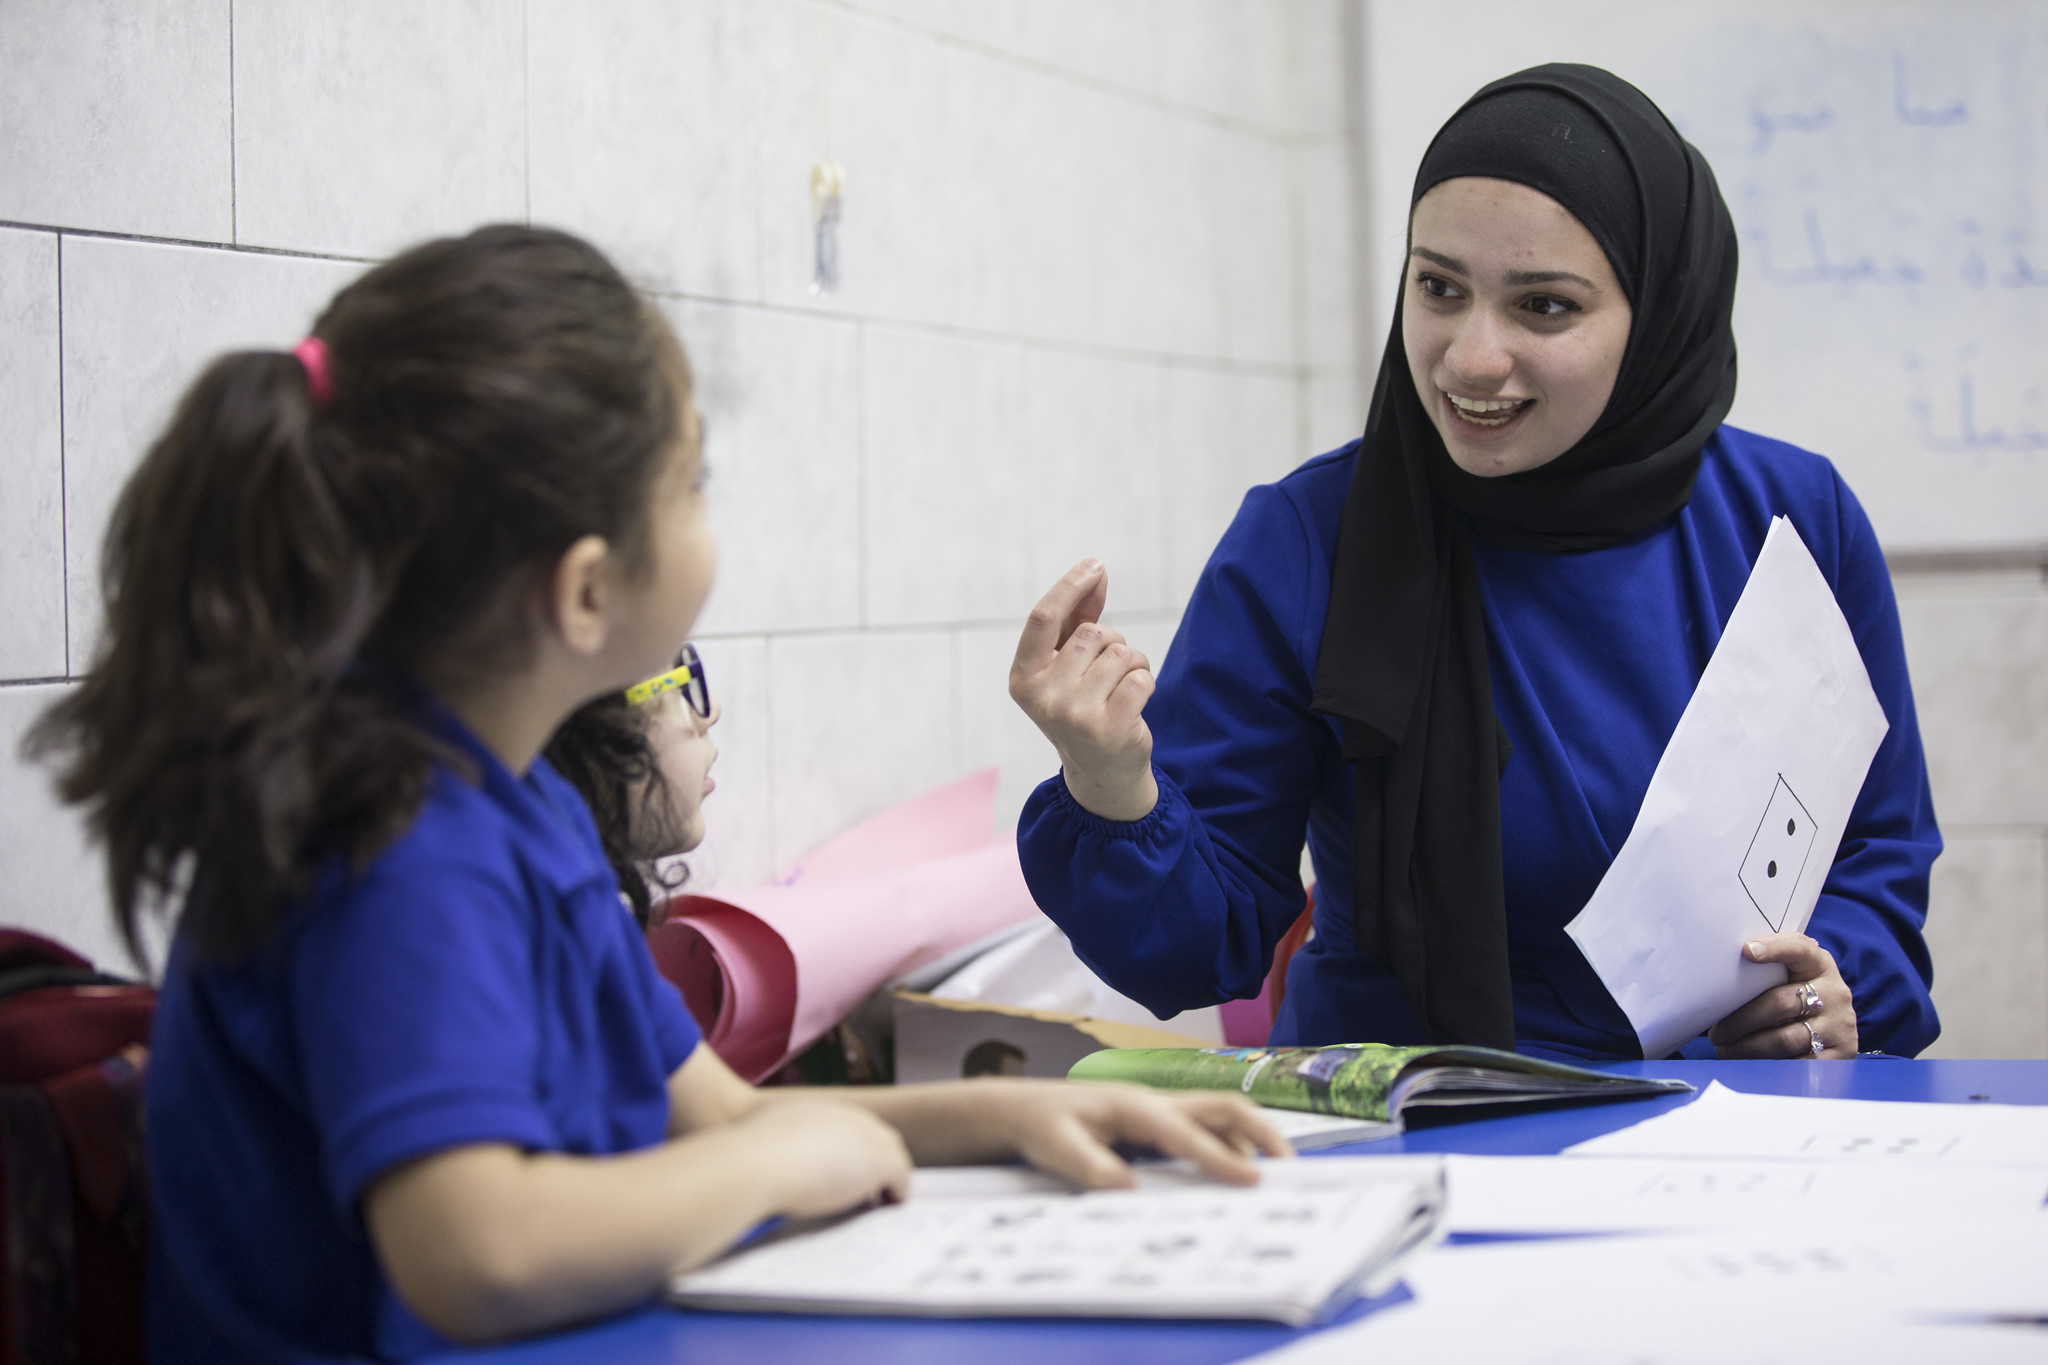 Jordanian Mais Walid Al-Mousa, 26,teaches the English language in a local primary school. Mais benefits from the Job Search Club projrect implemented by the International Labour Organisation (ILO) and funded by the Kingdom of the Netherlands as part of the Prospects Partnership.